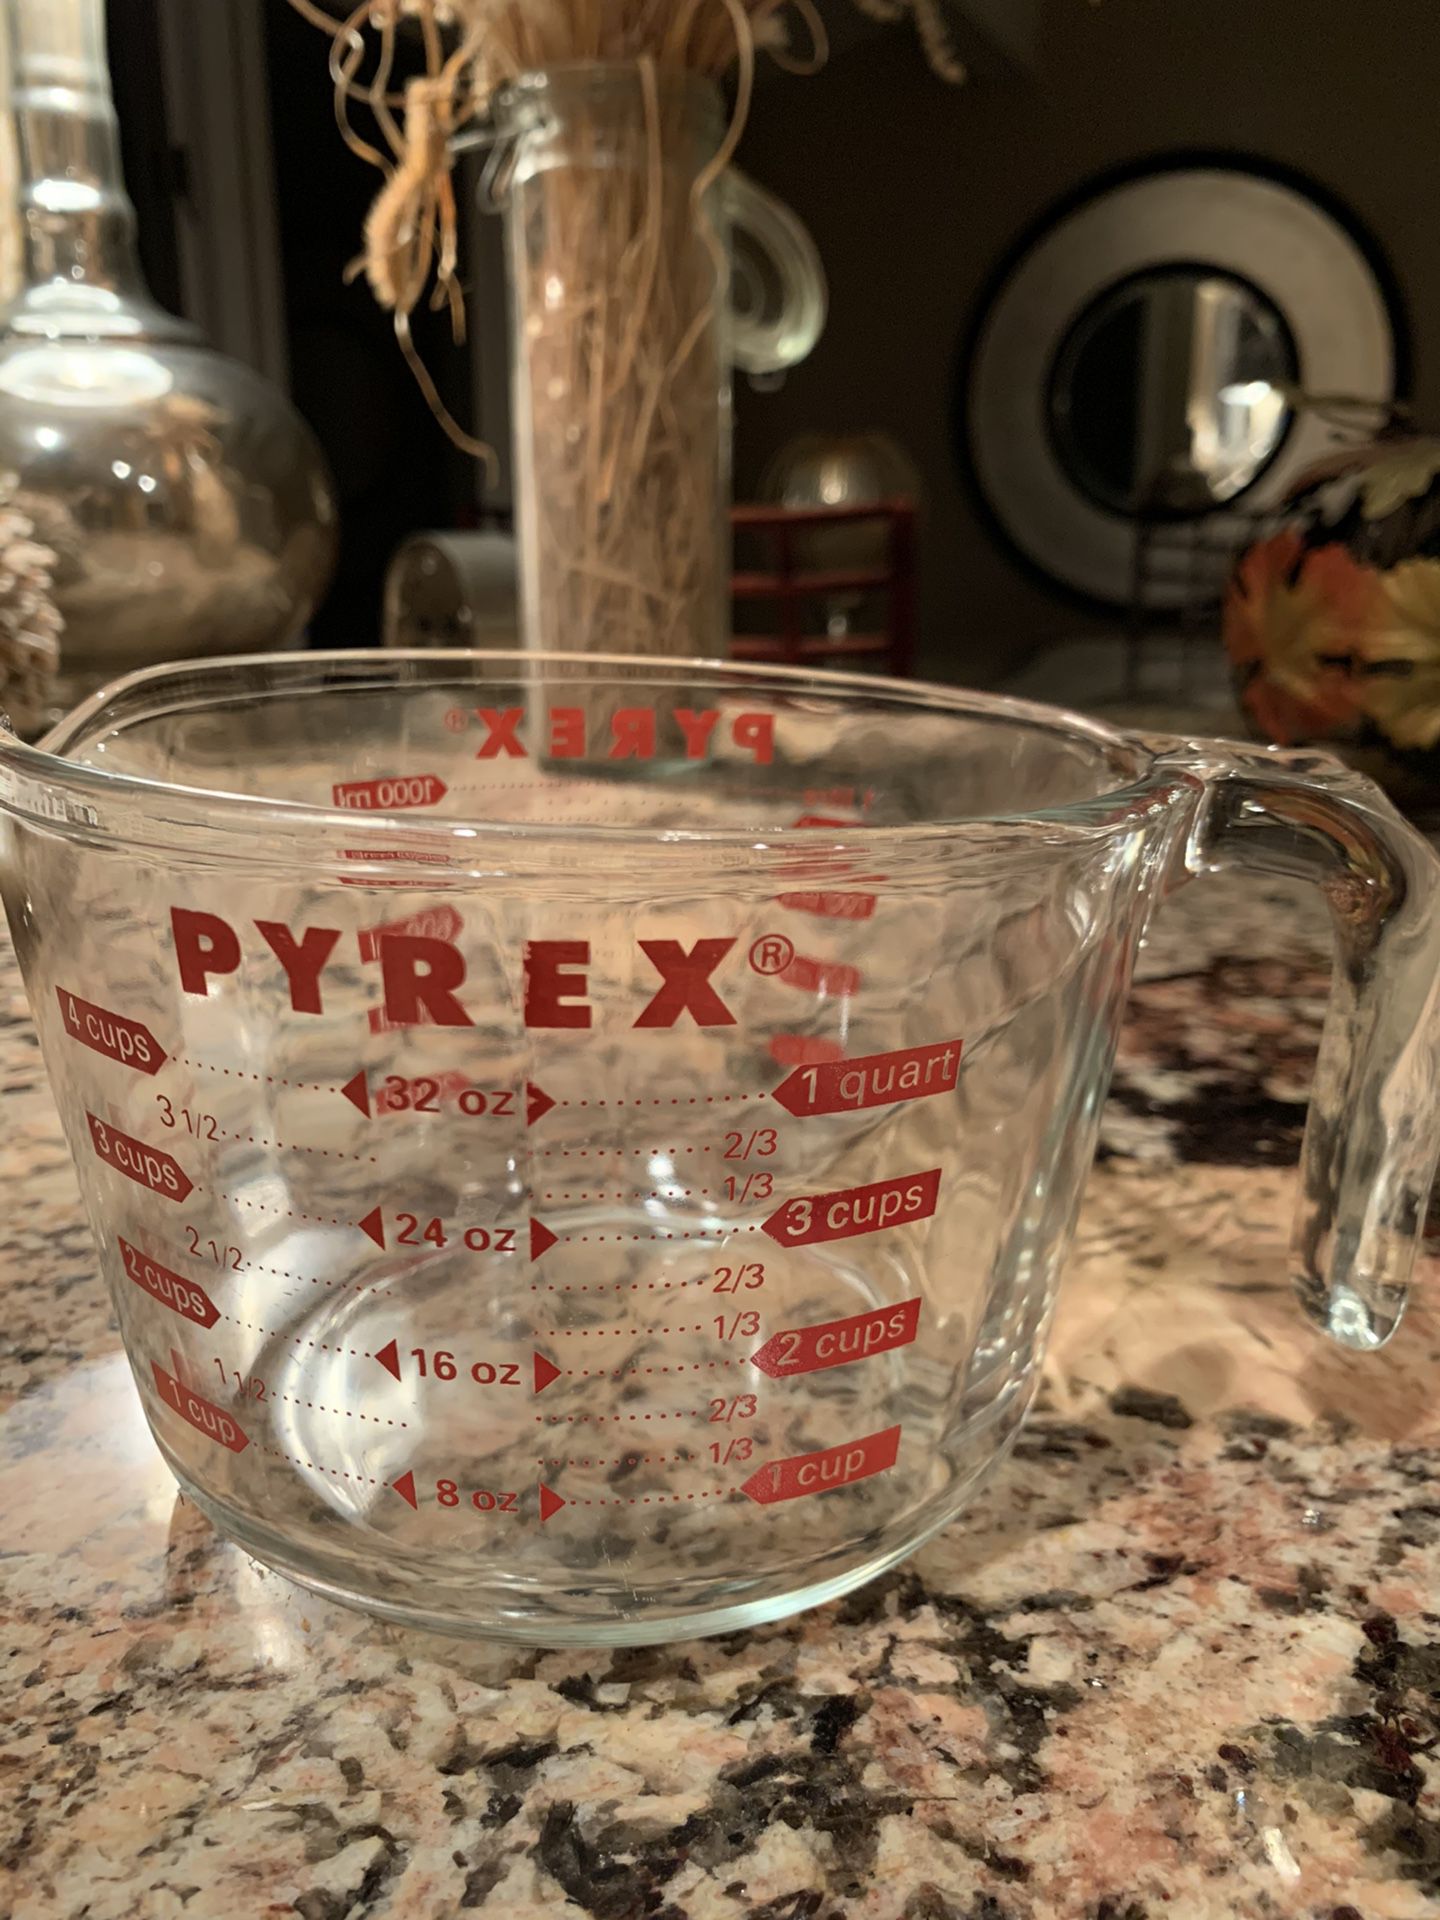 One Quart Pyrex Measuring Cup - Brand New